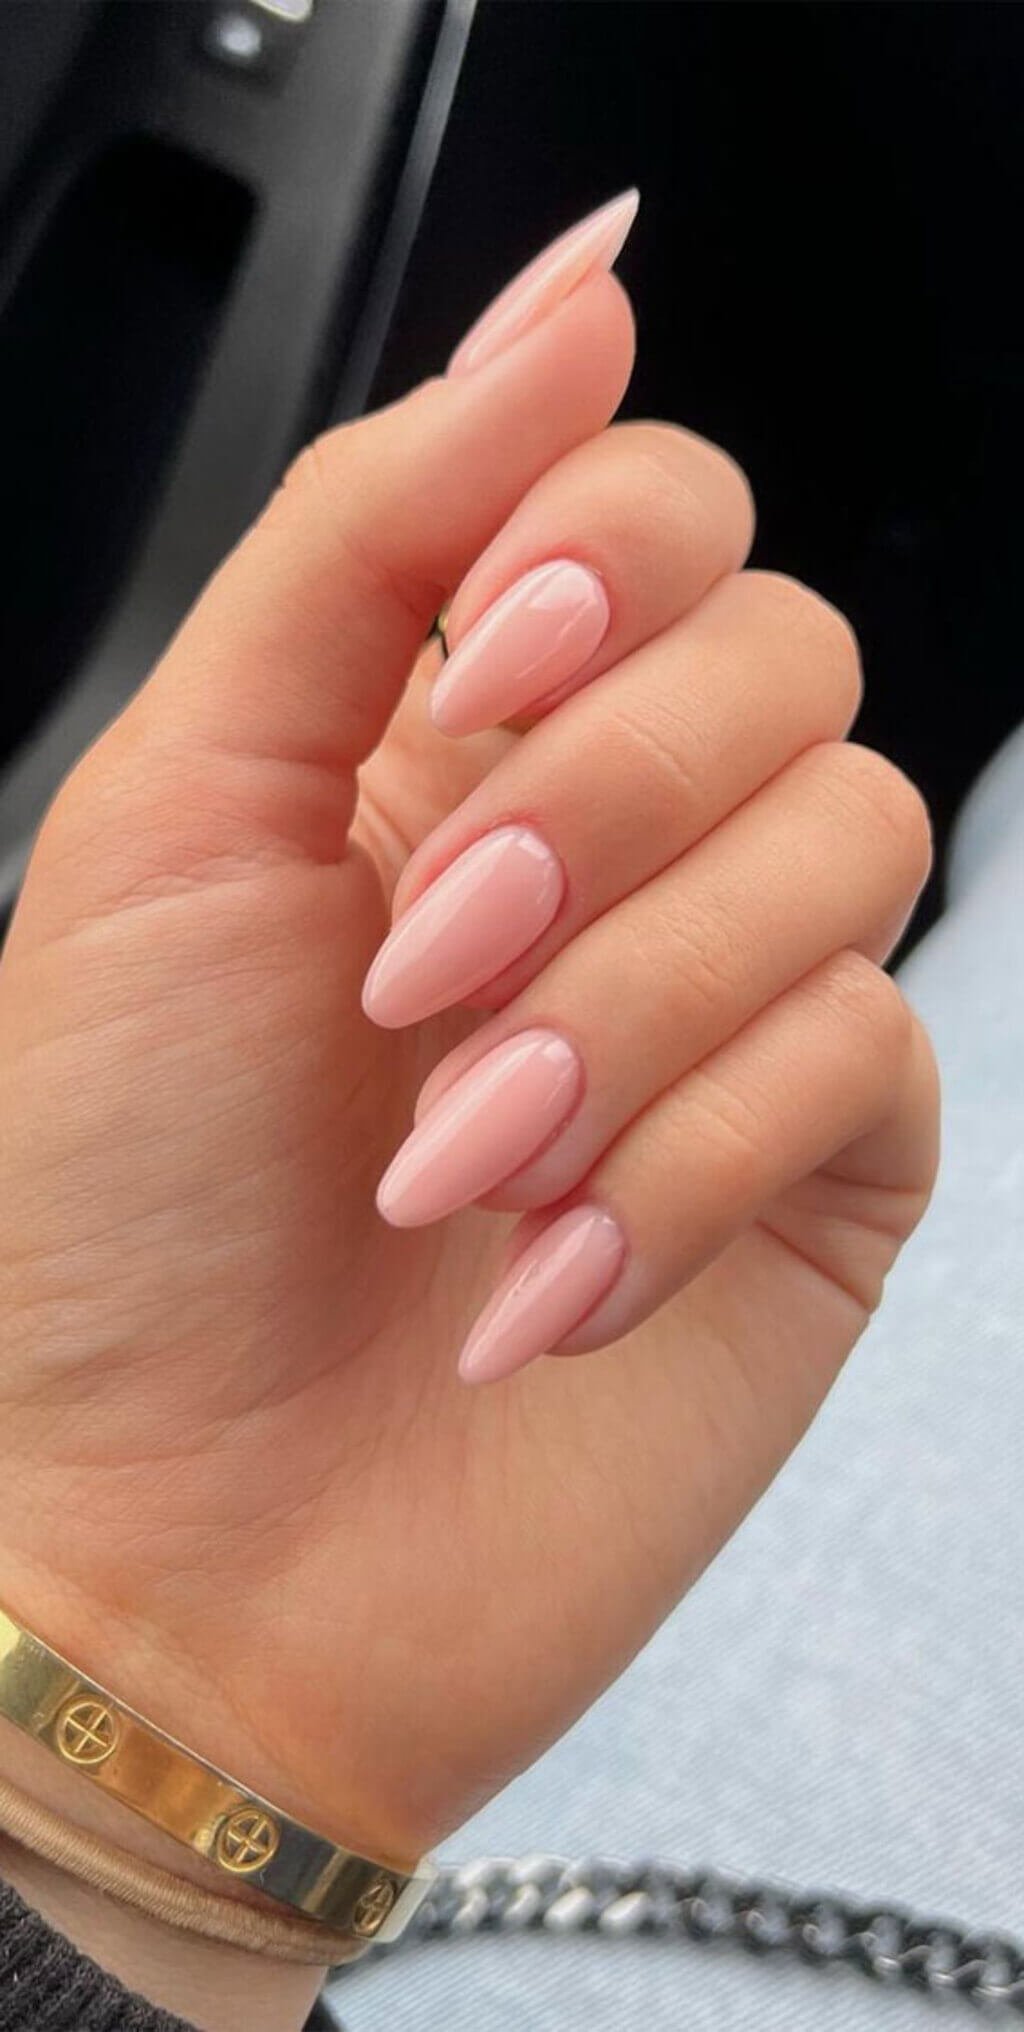 Pink Nude Nails